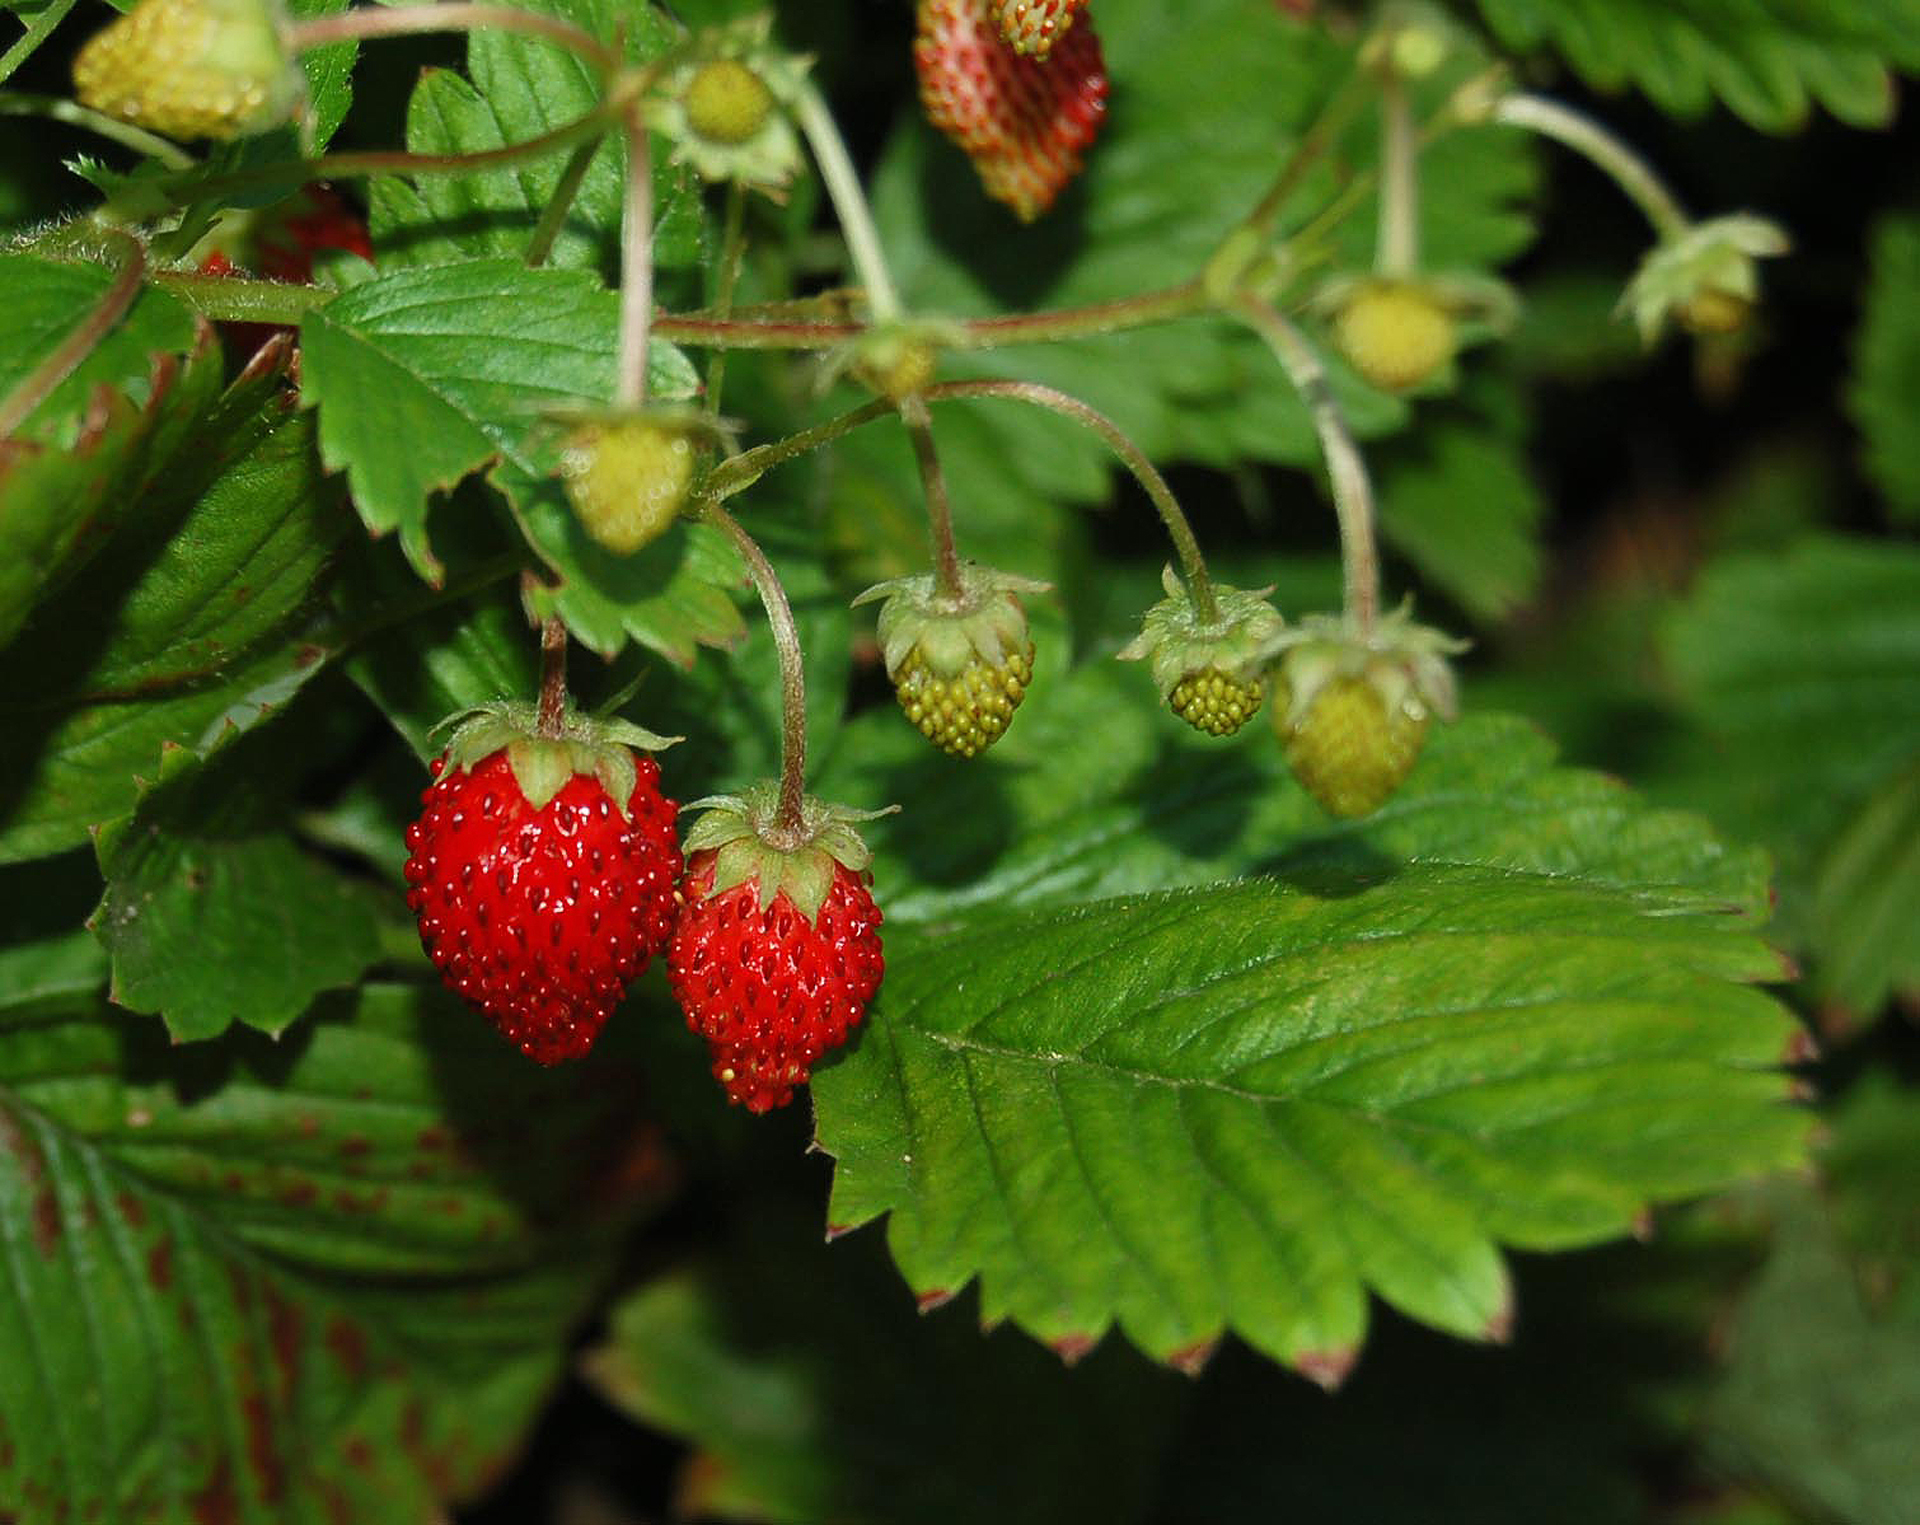 Tiny, conical fraises des bois deliver amazing flavor and aroma.